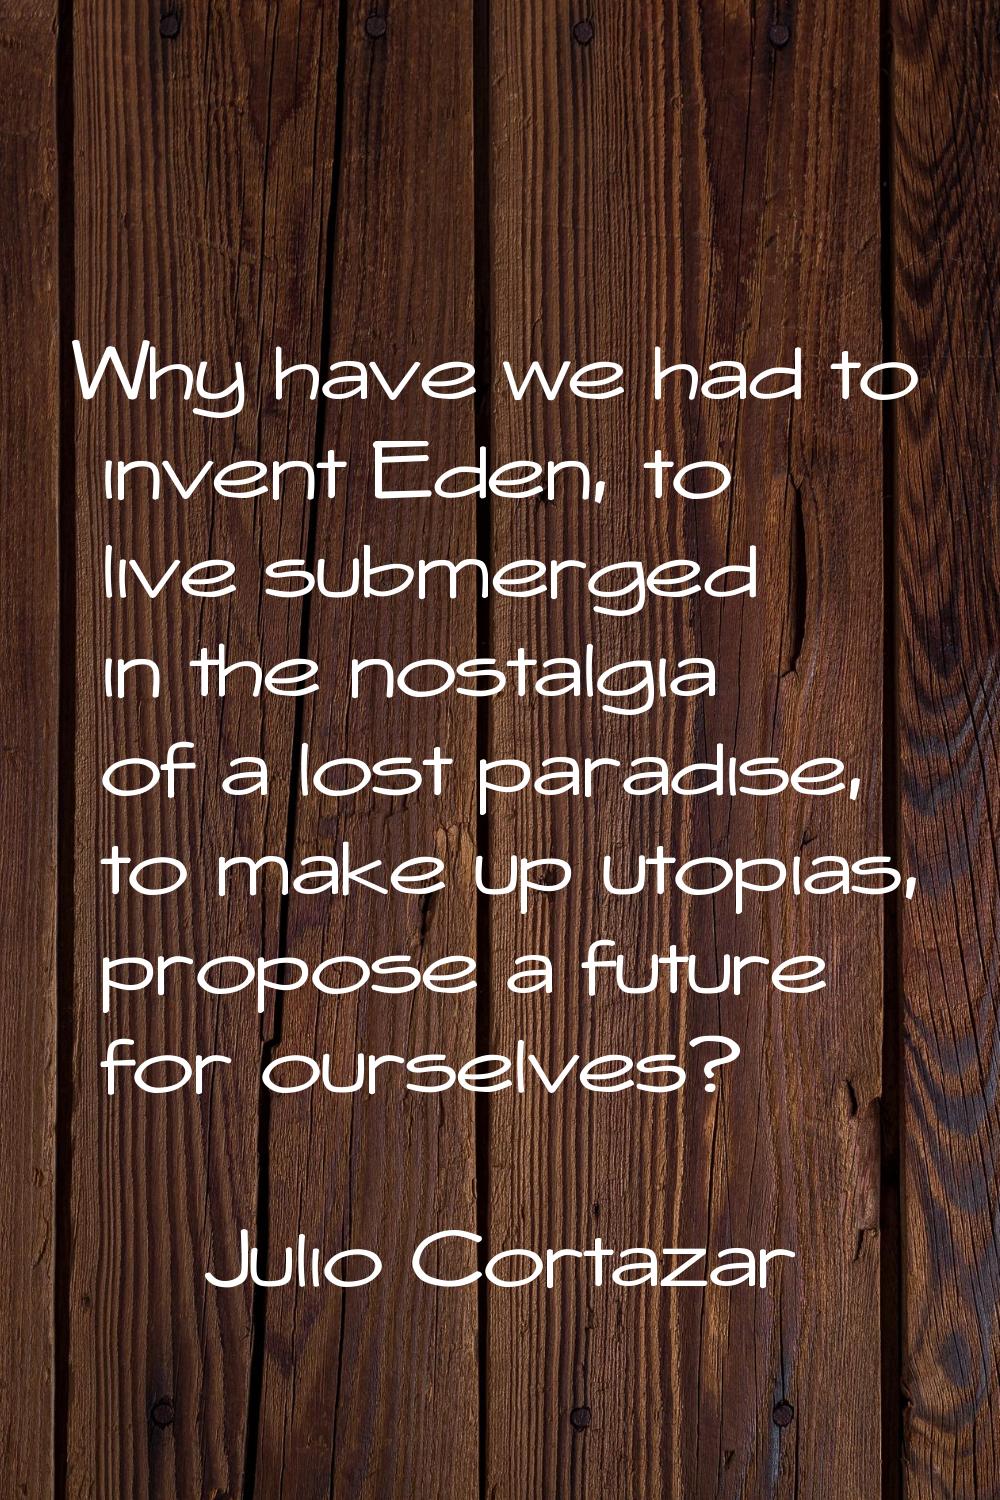 Why have we had to invent Eden, to live submerged in the nostalgia of a lost paradise, to make up u